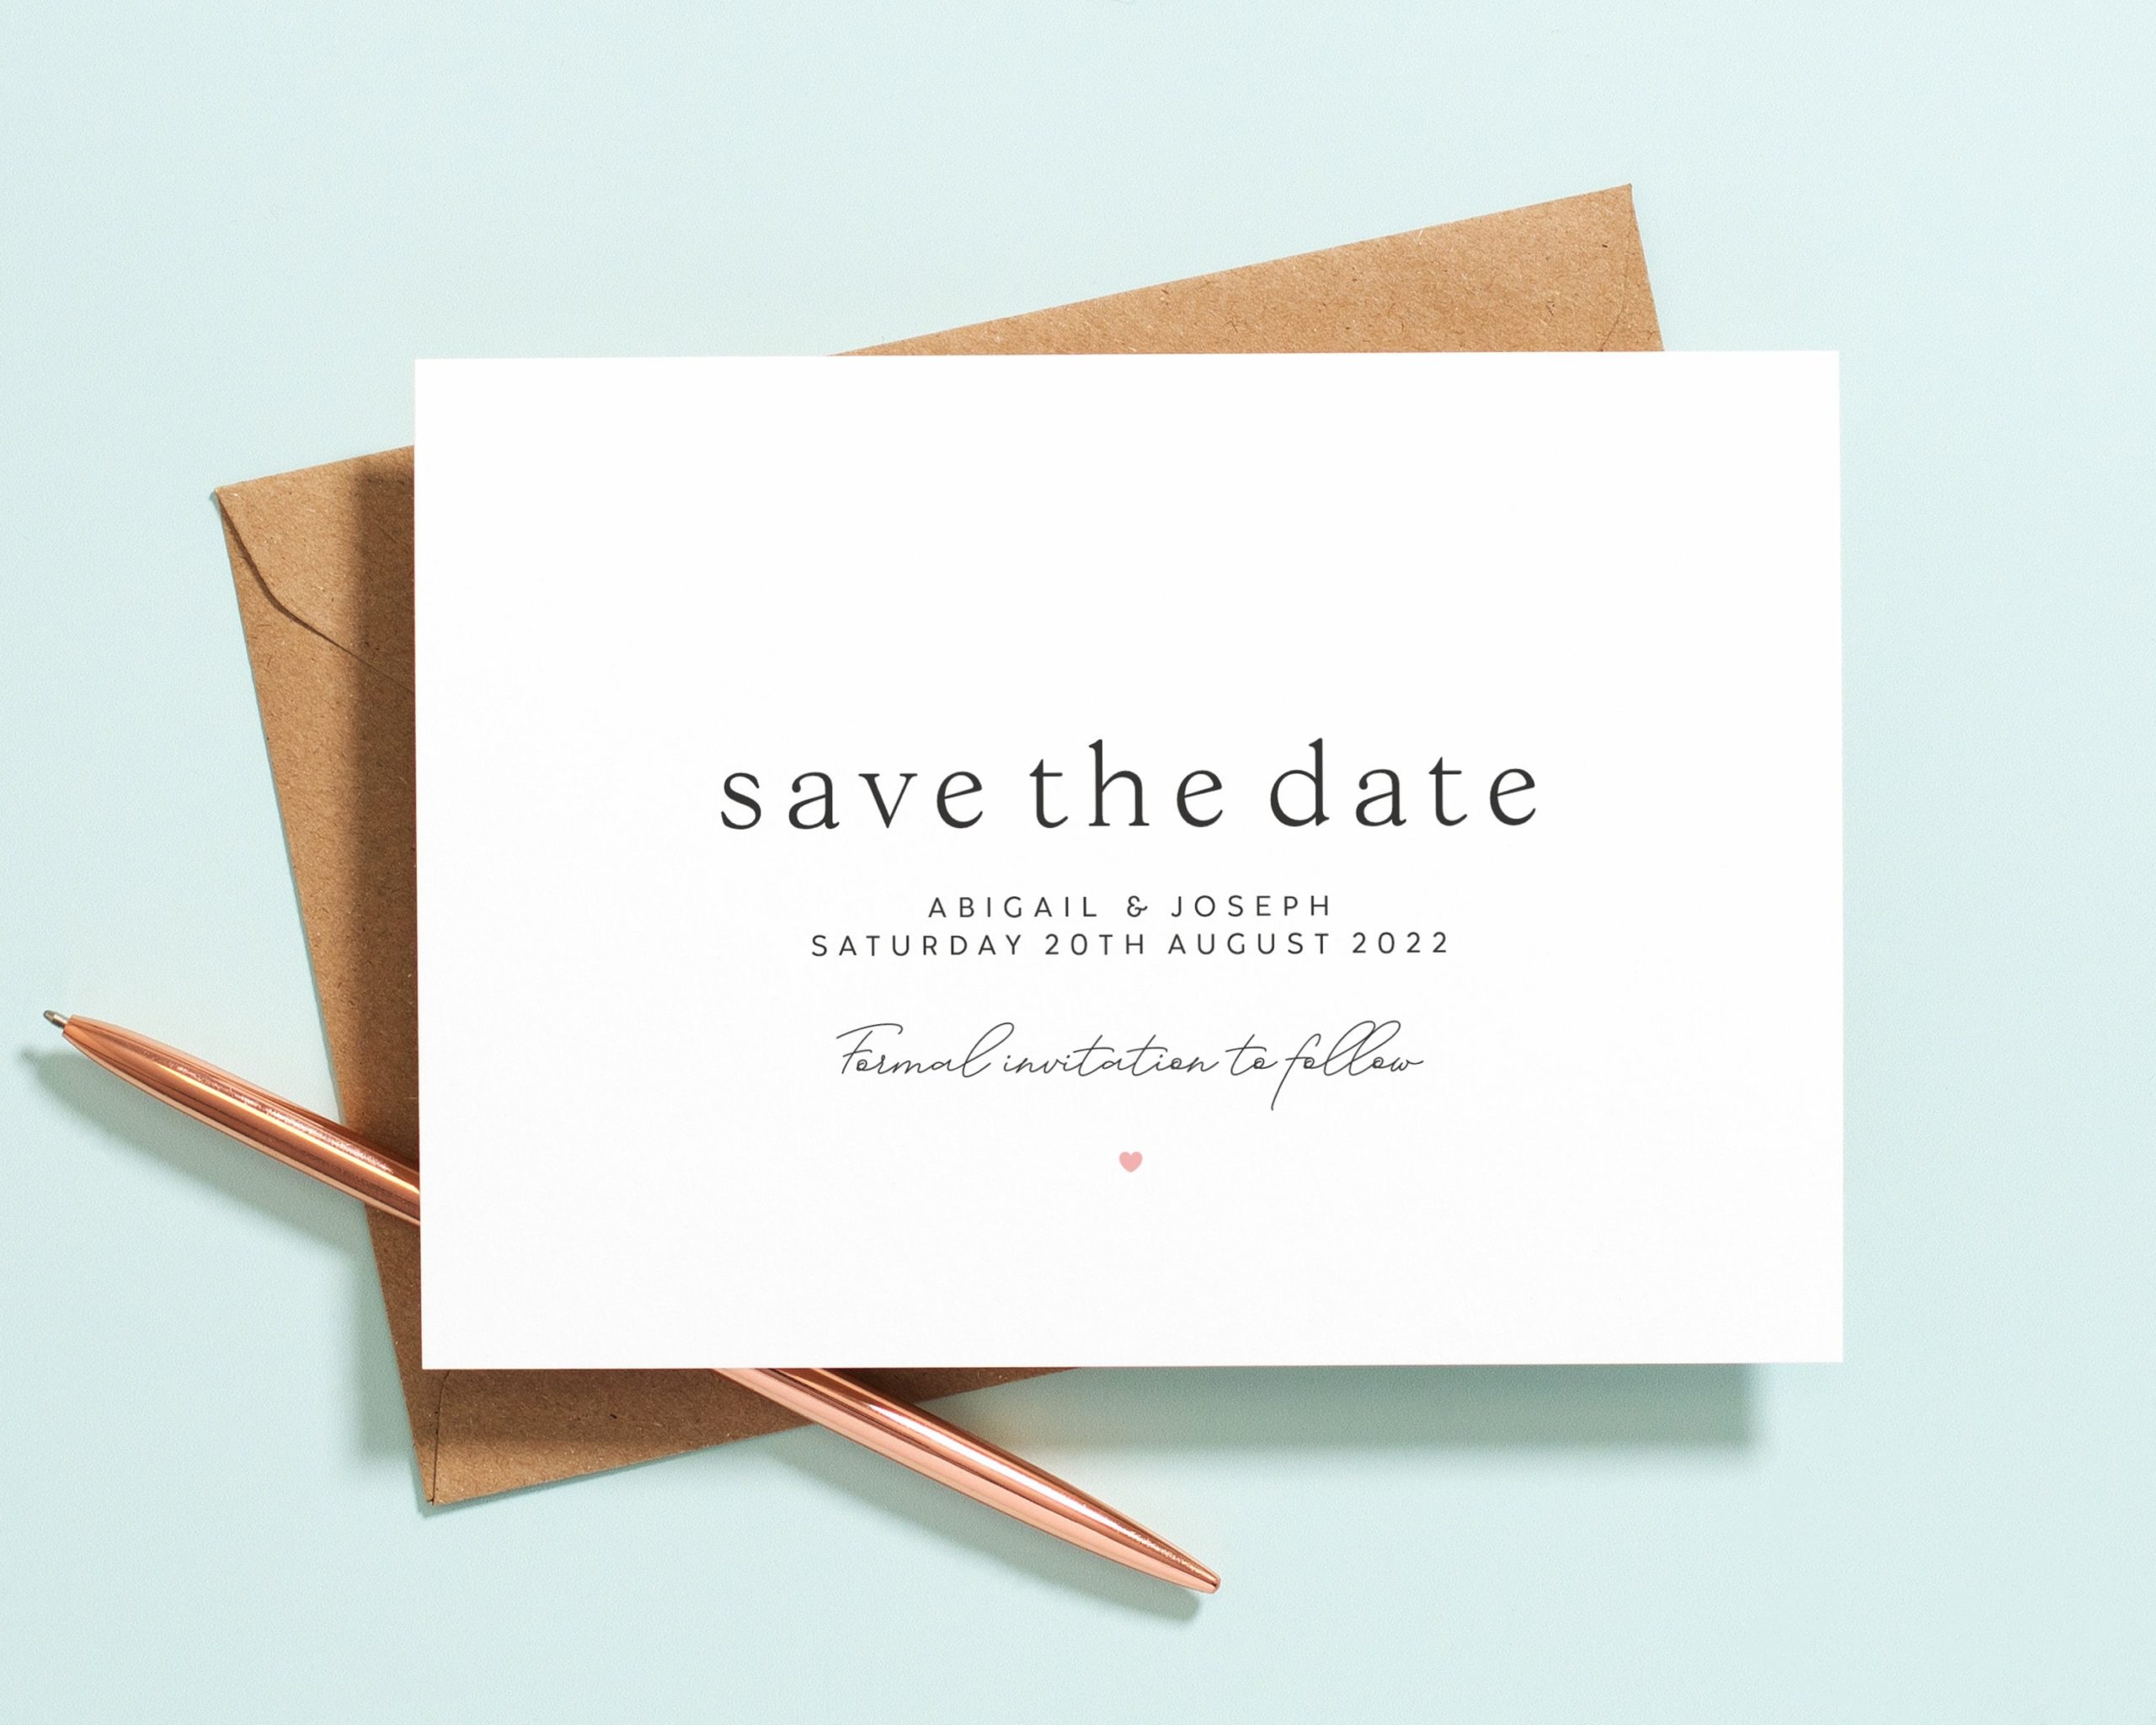 sample save the date cards for business events 1